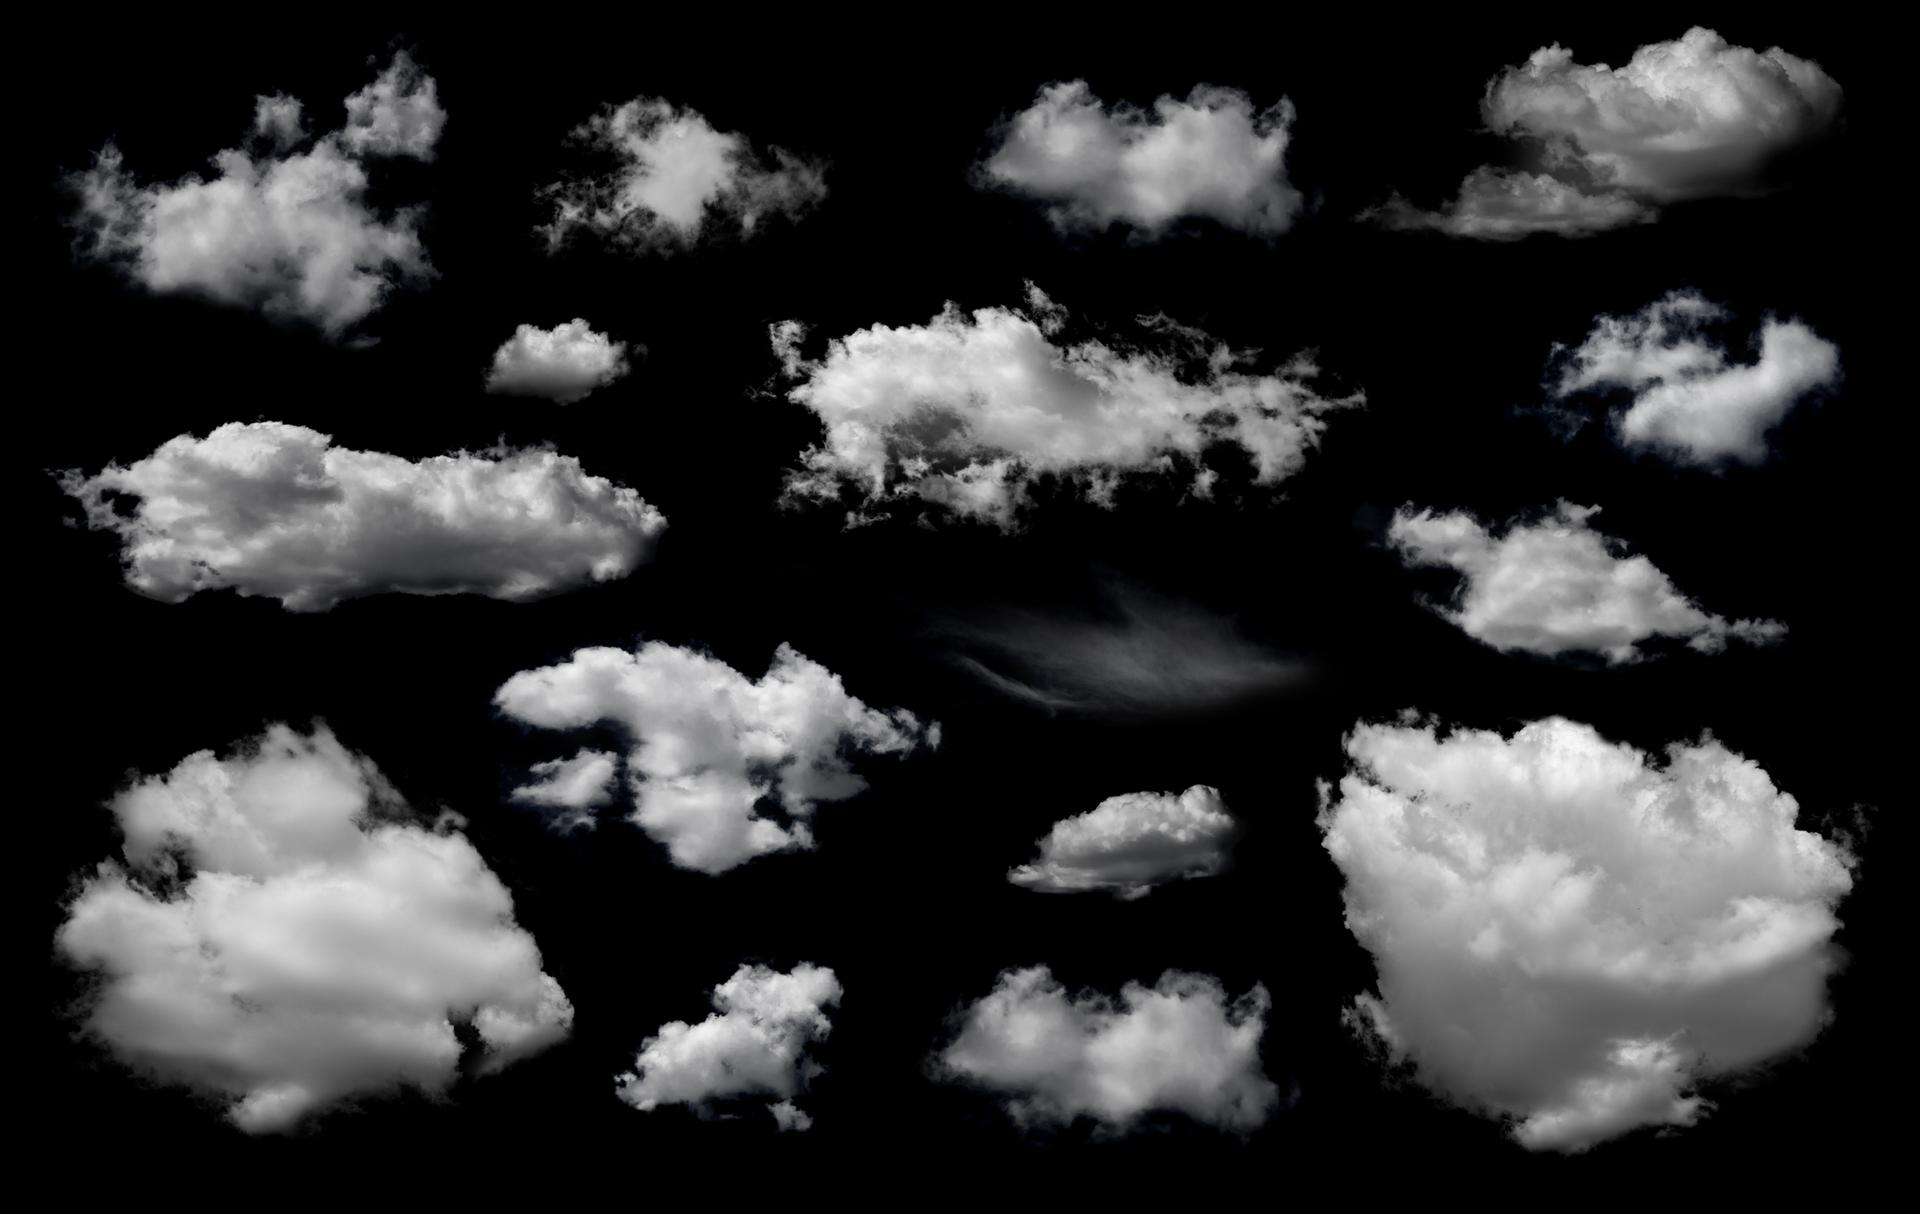 Clouds set isolated on black background. White cloudiness, mist or smog background.